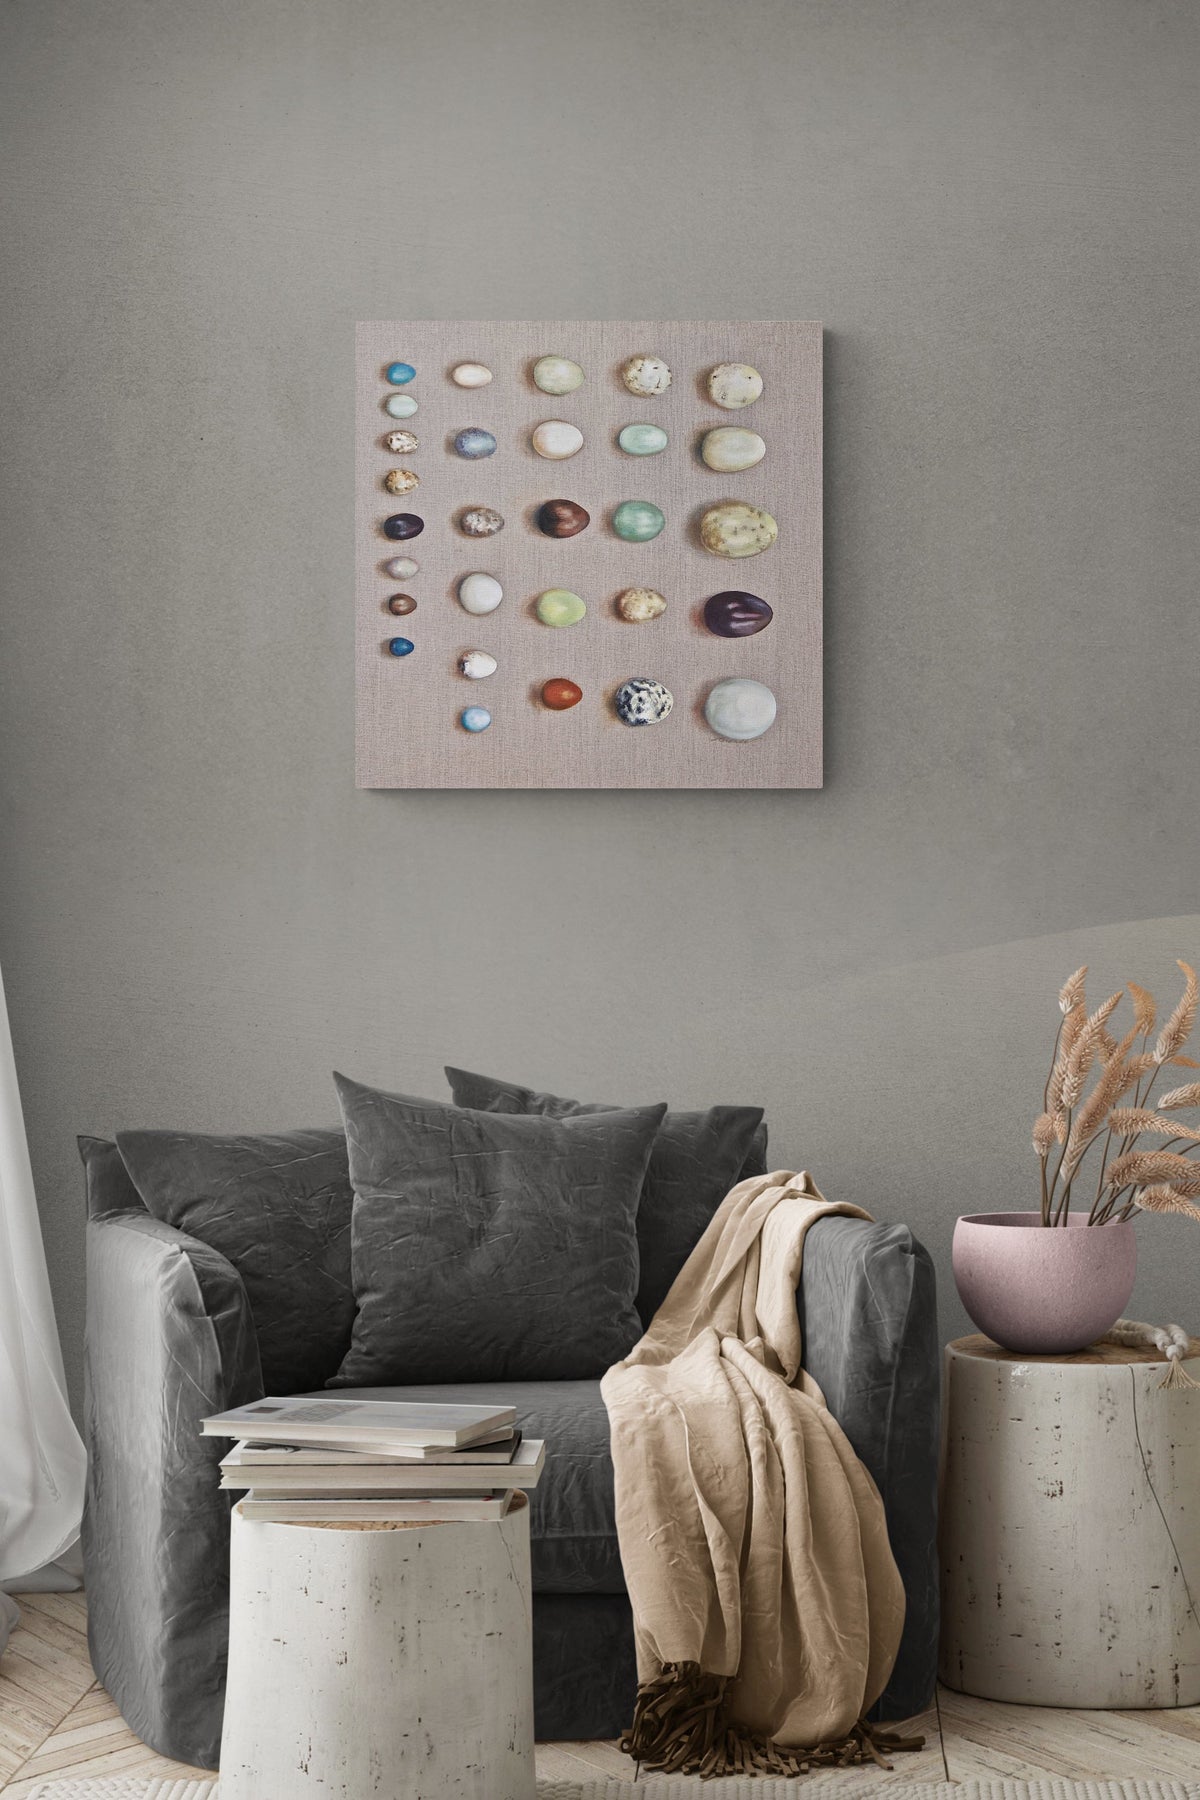 Contemporary Seaside Painting with bird eggs adds nature to this cozy living space